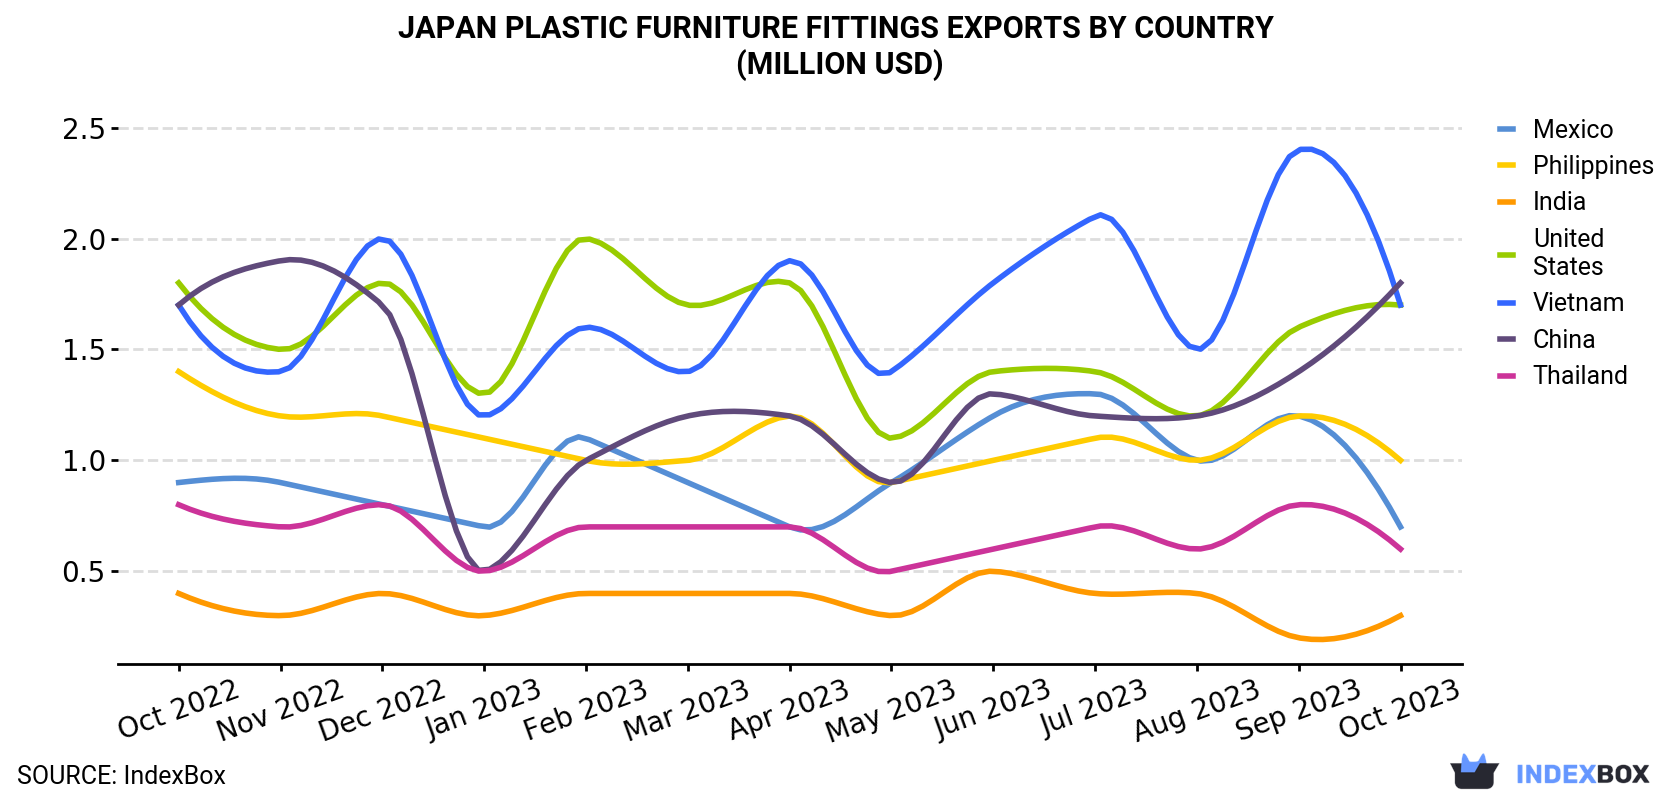 Japan Plastic Furniture Fittings Exports By Country (Million USD)